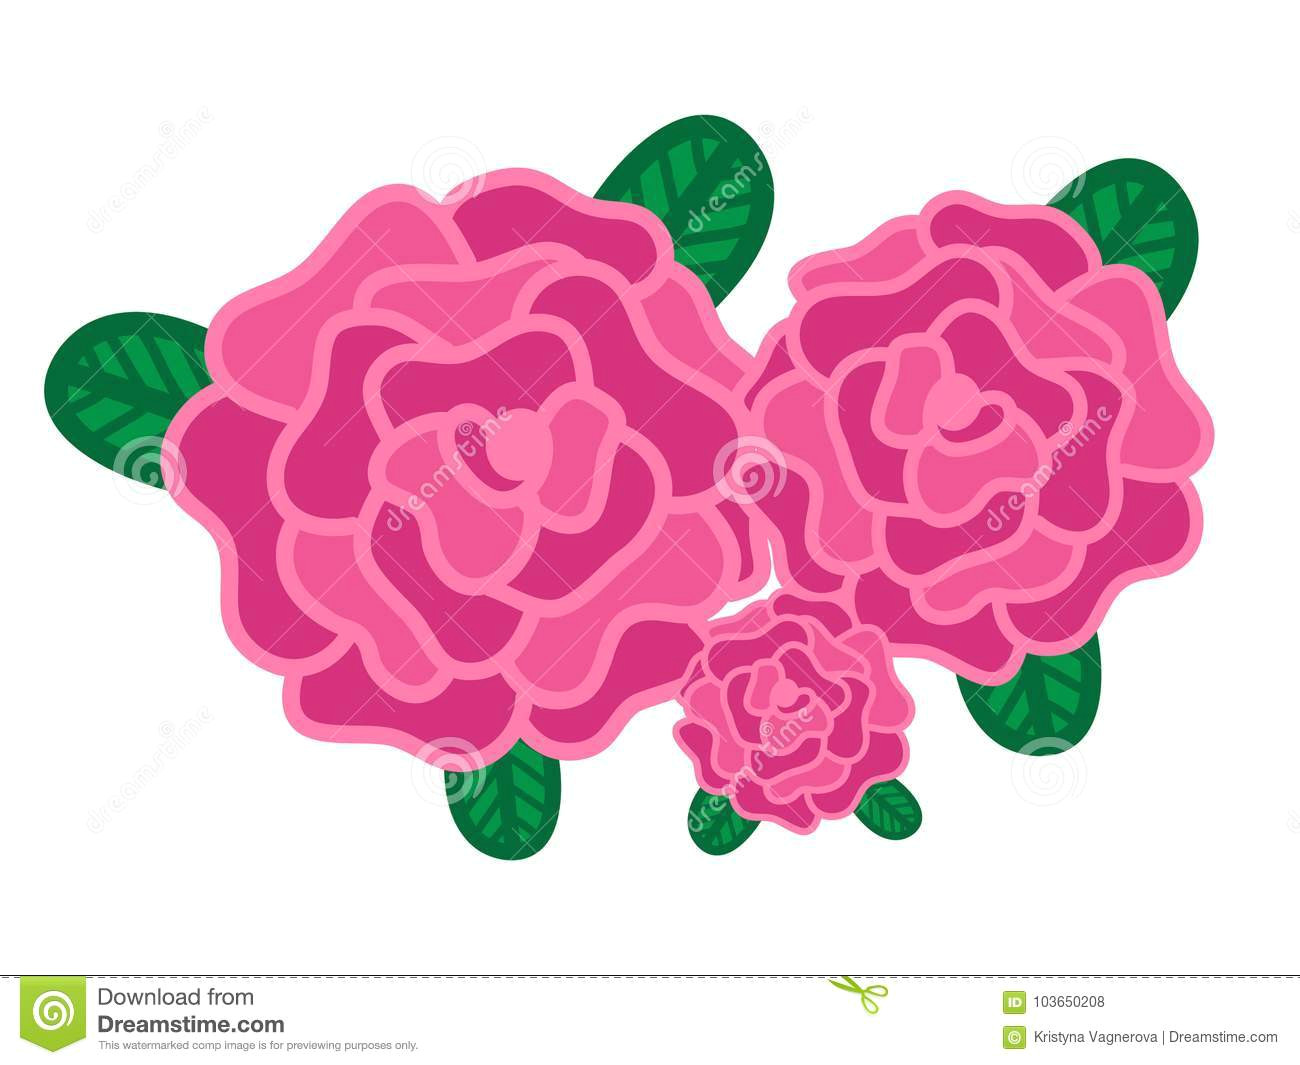 Drawings Of Bunch Of Roses Pink Roses with Leaves Vector Stock Vector Illustration Of Flower